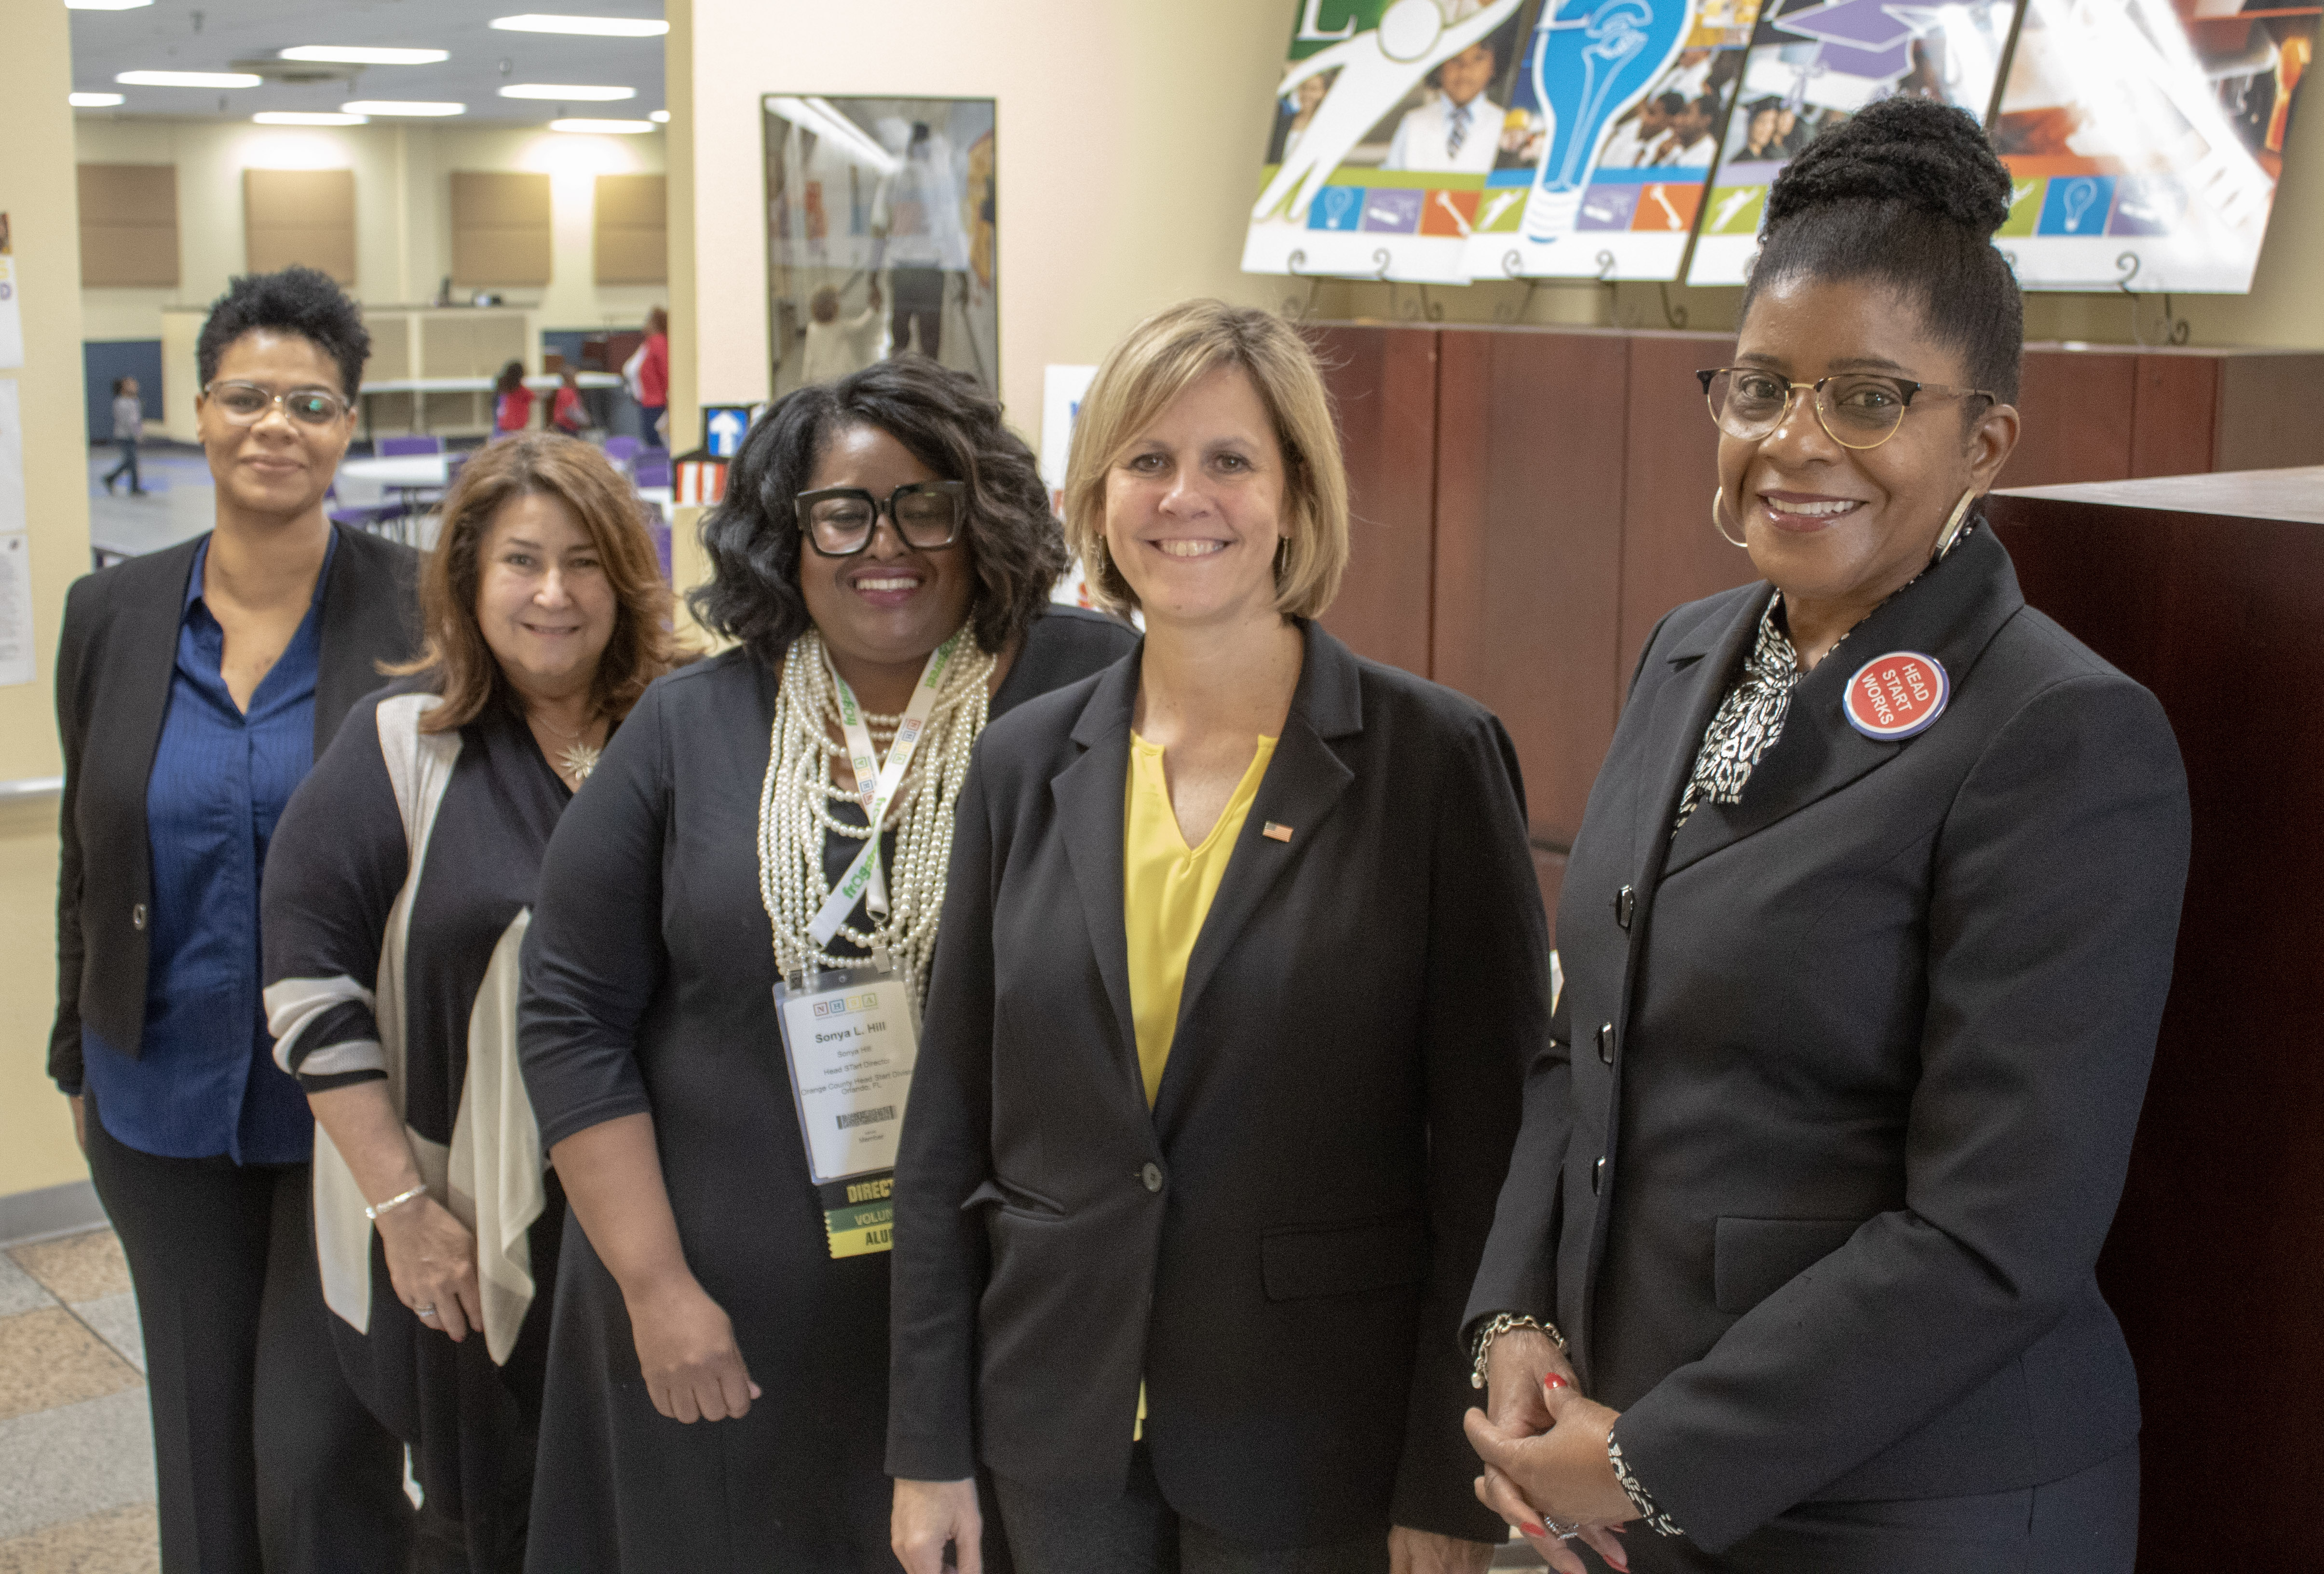 Five Head Start staff members, all women, standing in a diagonal line for a photo. They are smiling and are inside an office setting.